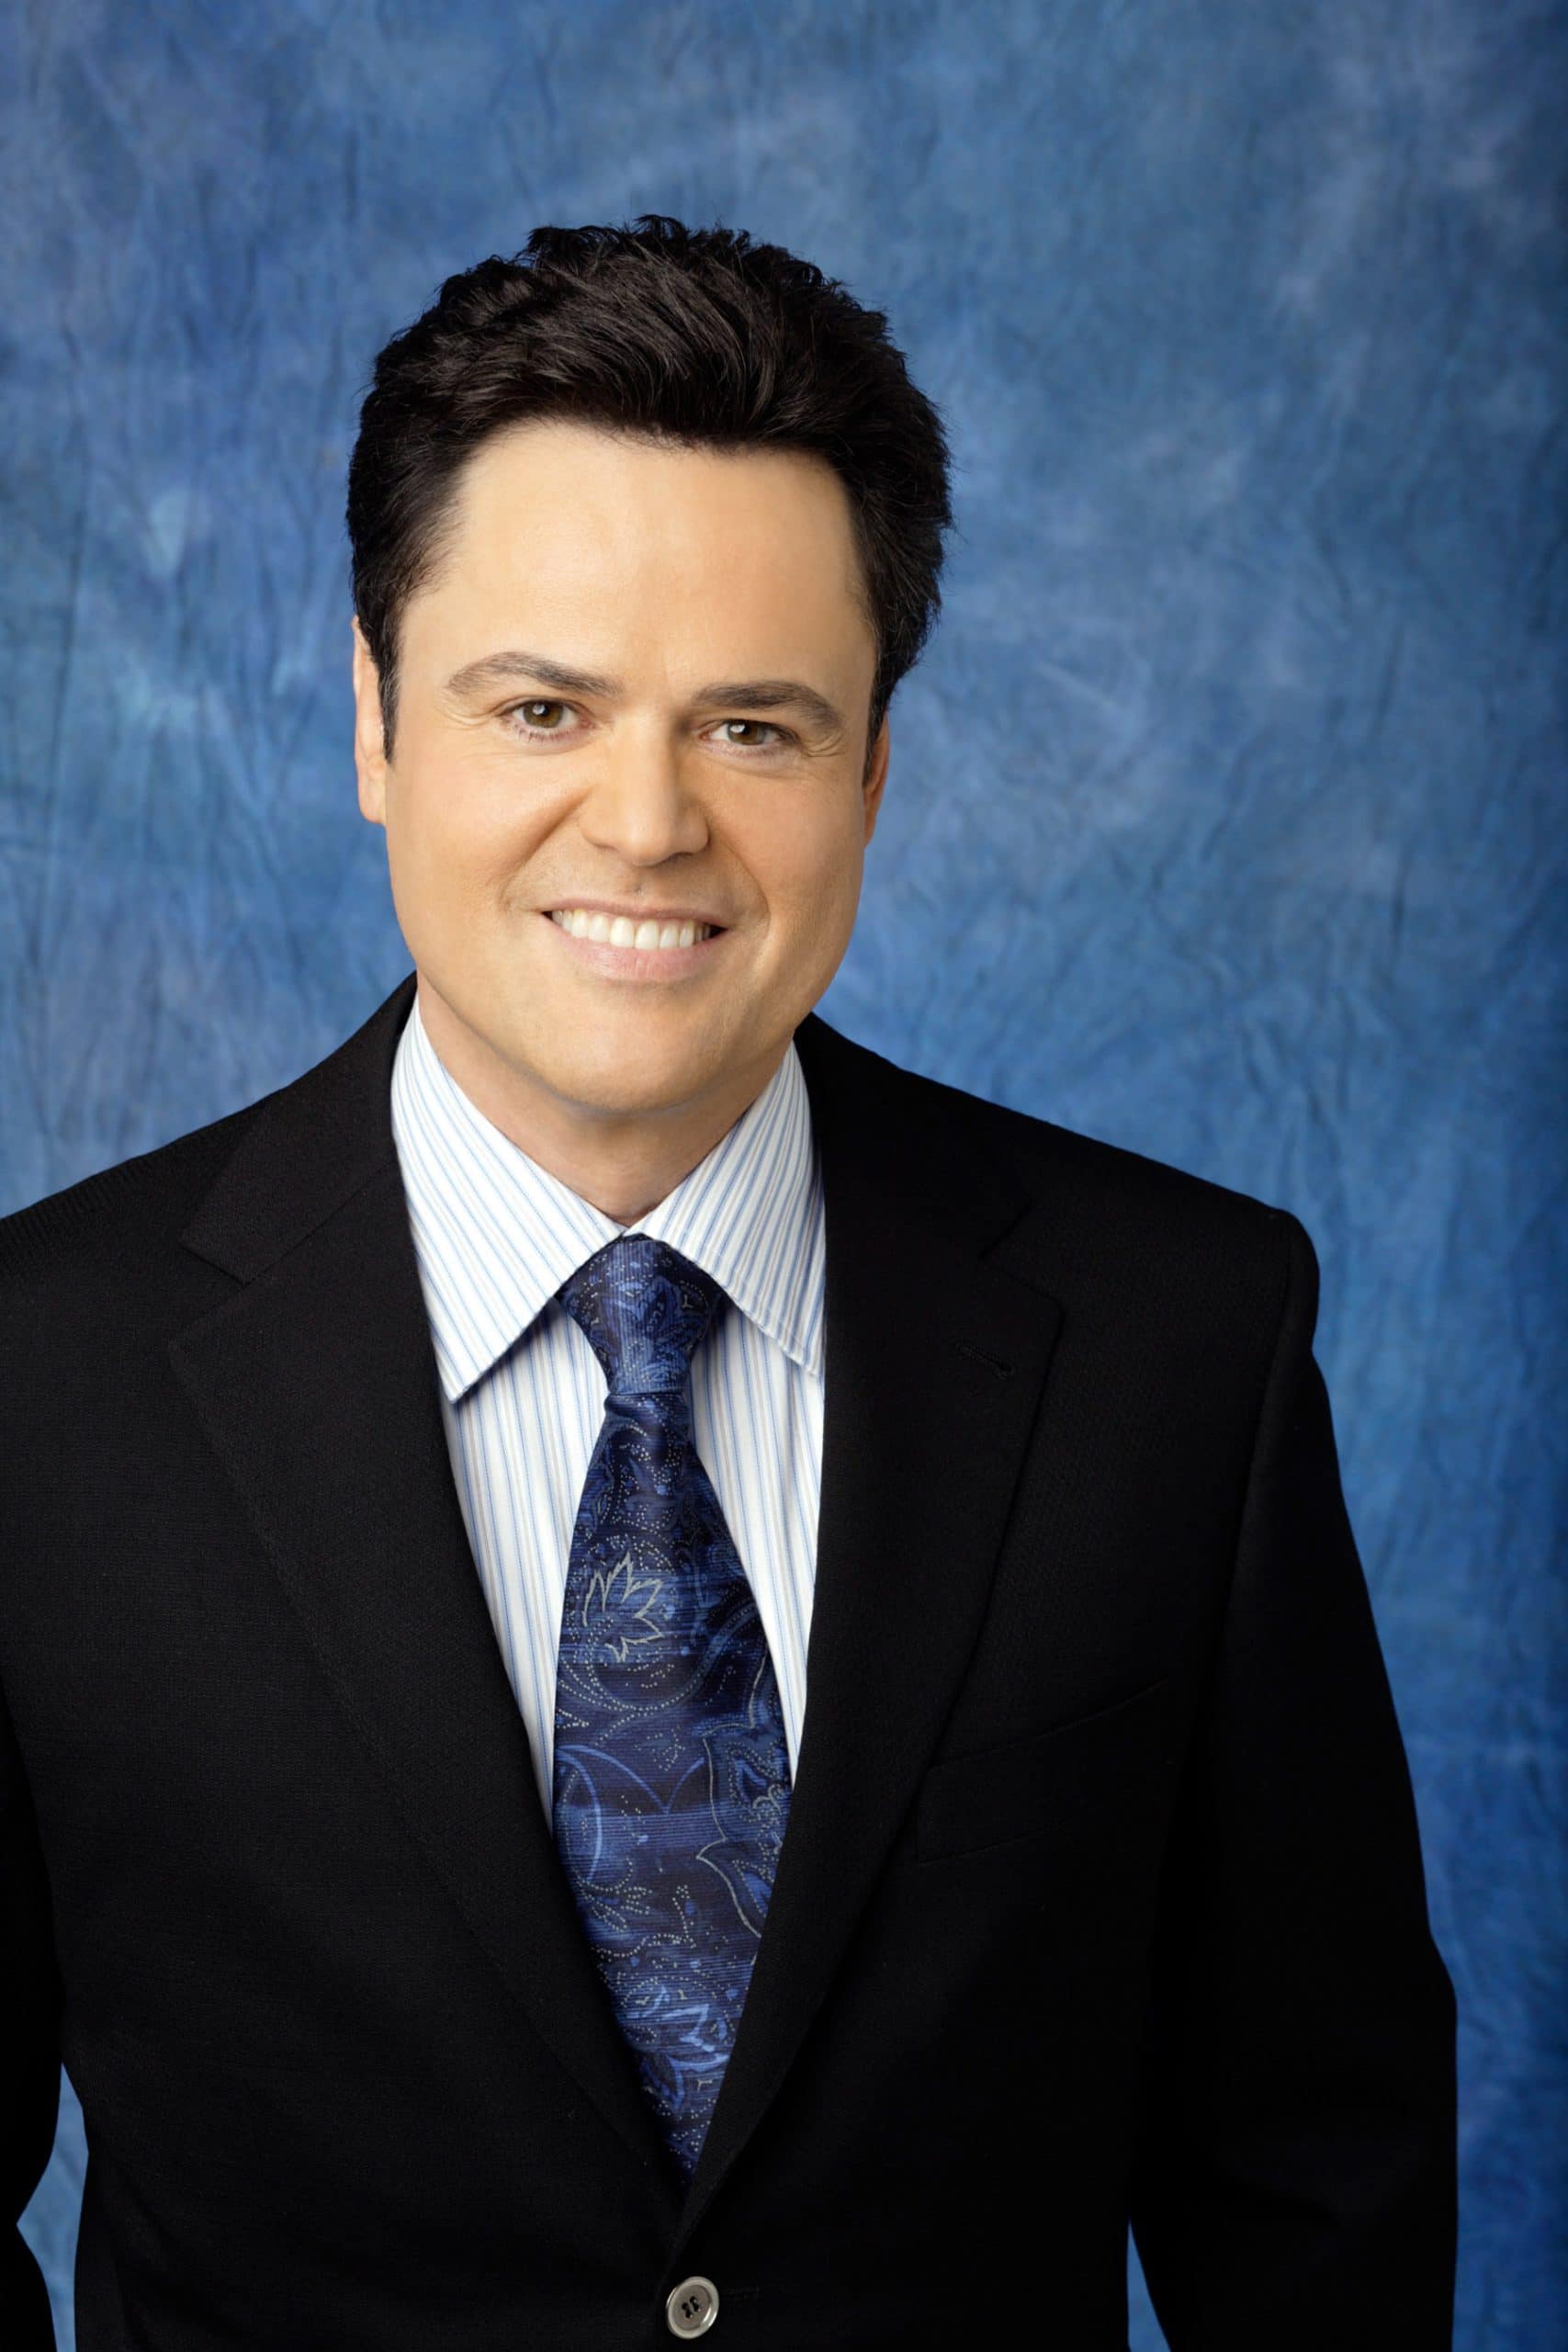 THE GREAT AMERICAN DREAM VOTE, host Donny Osmond